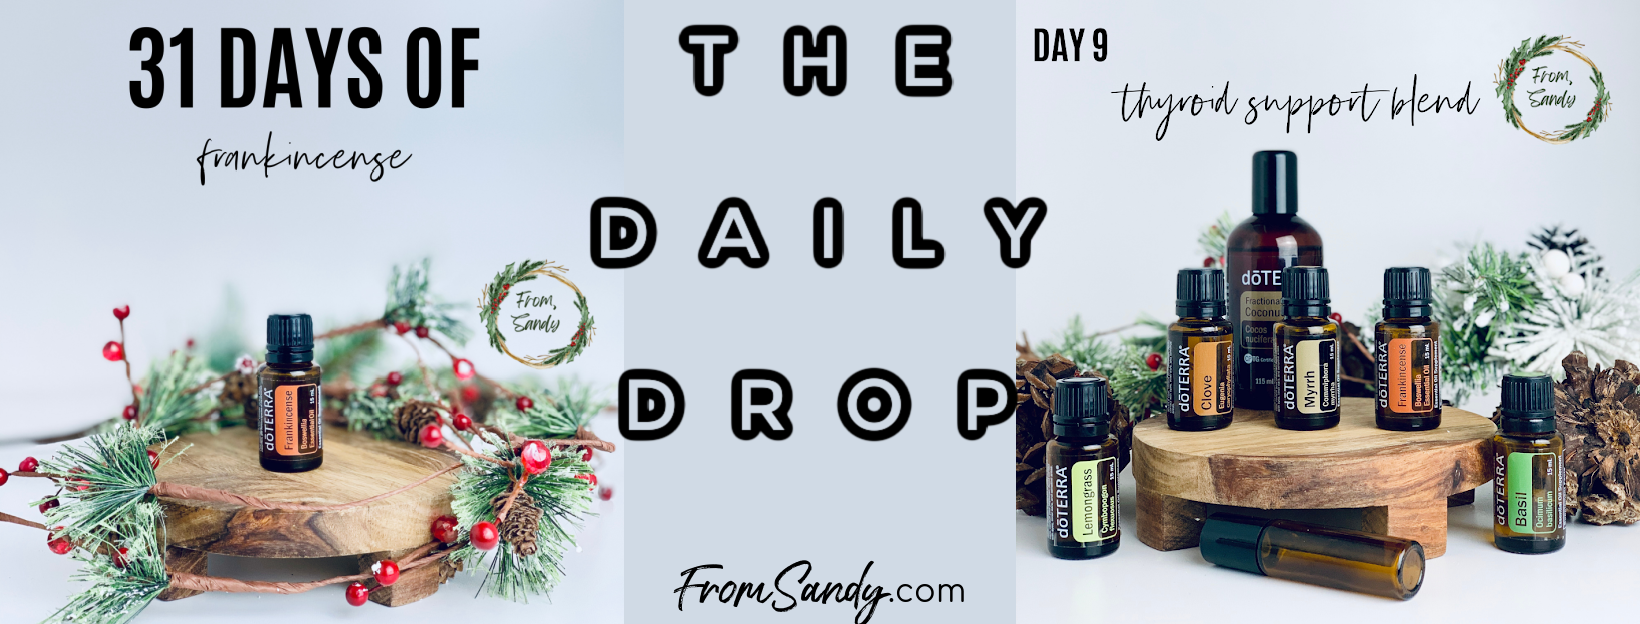 Thyroid Support Blend (31 Days of Frankincense: Day 9), From Sandy